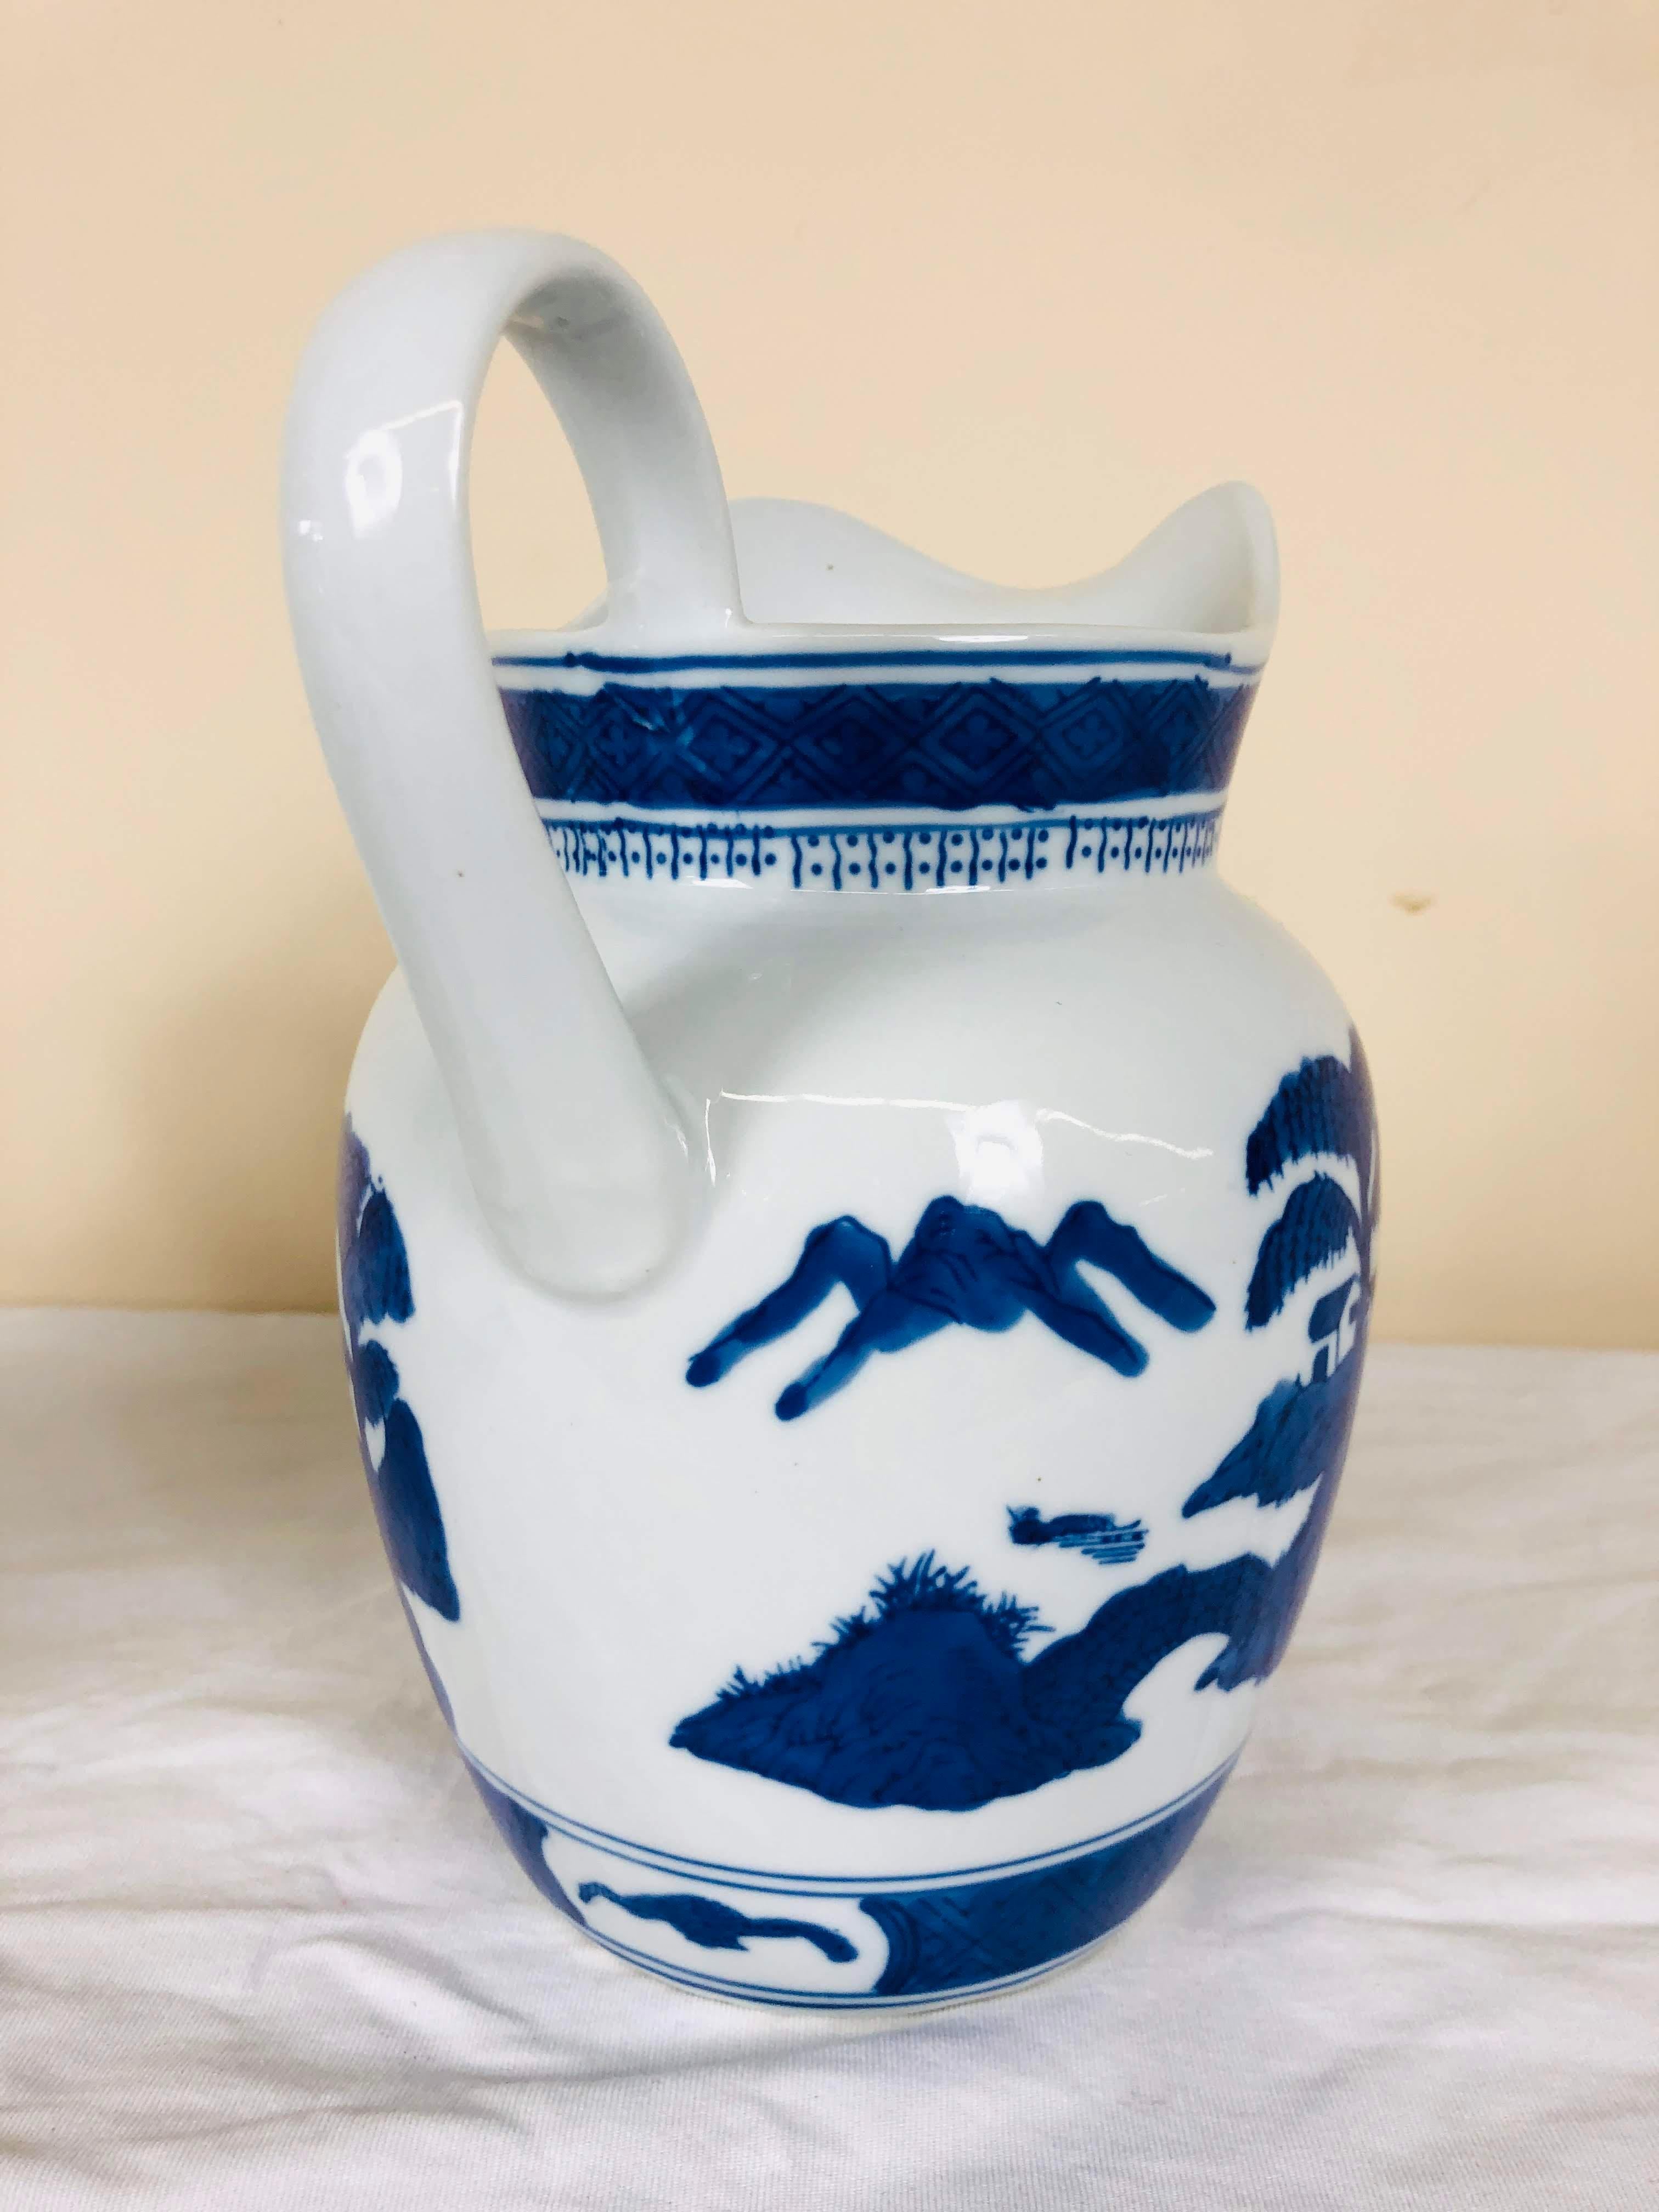 Blue and white porcelain pitcher.